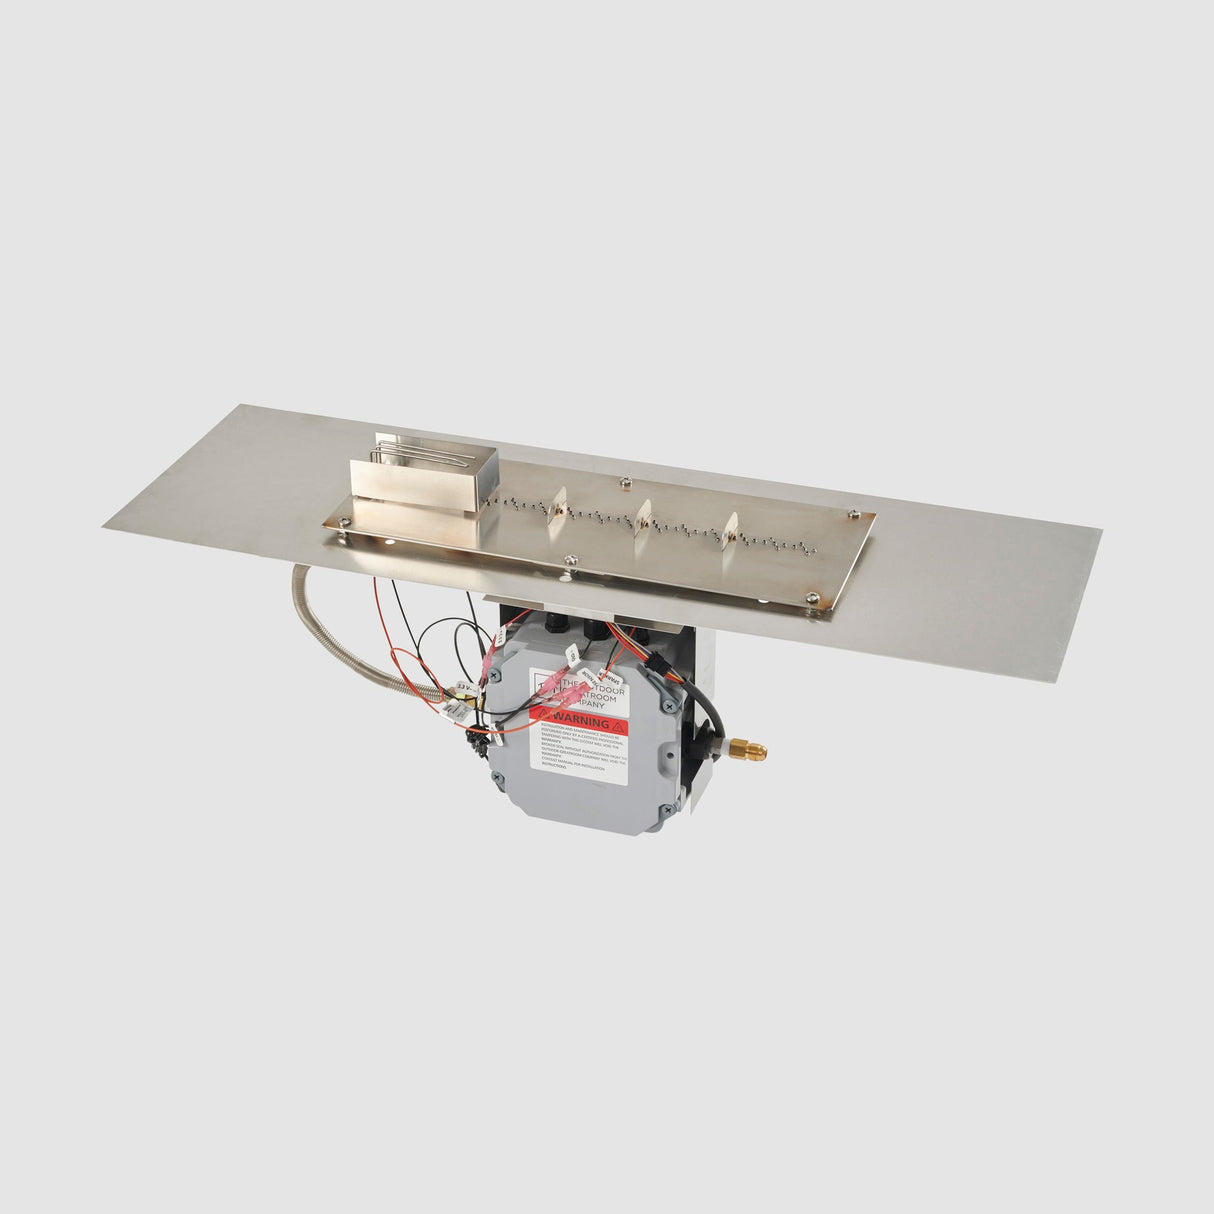 The 36" Crystal Fire Plus Linear Gas Burner Insert and Plate Kit with Direct Spark Ignition on a grey background